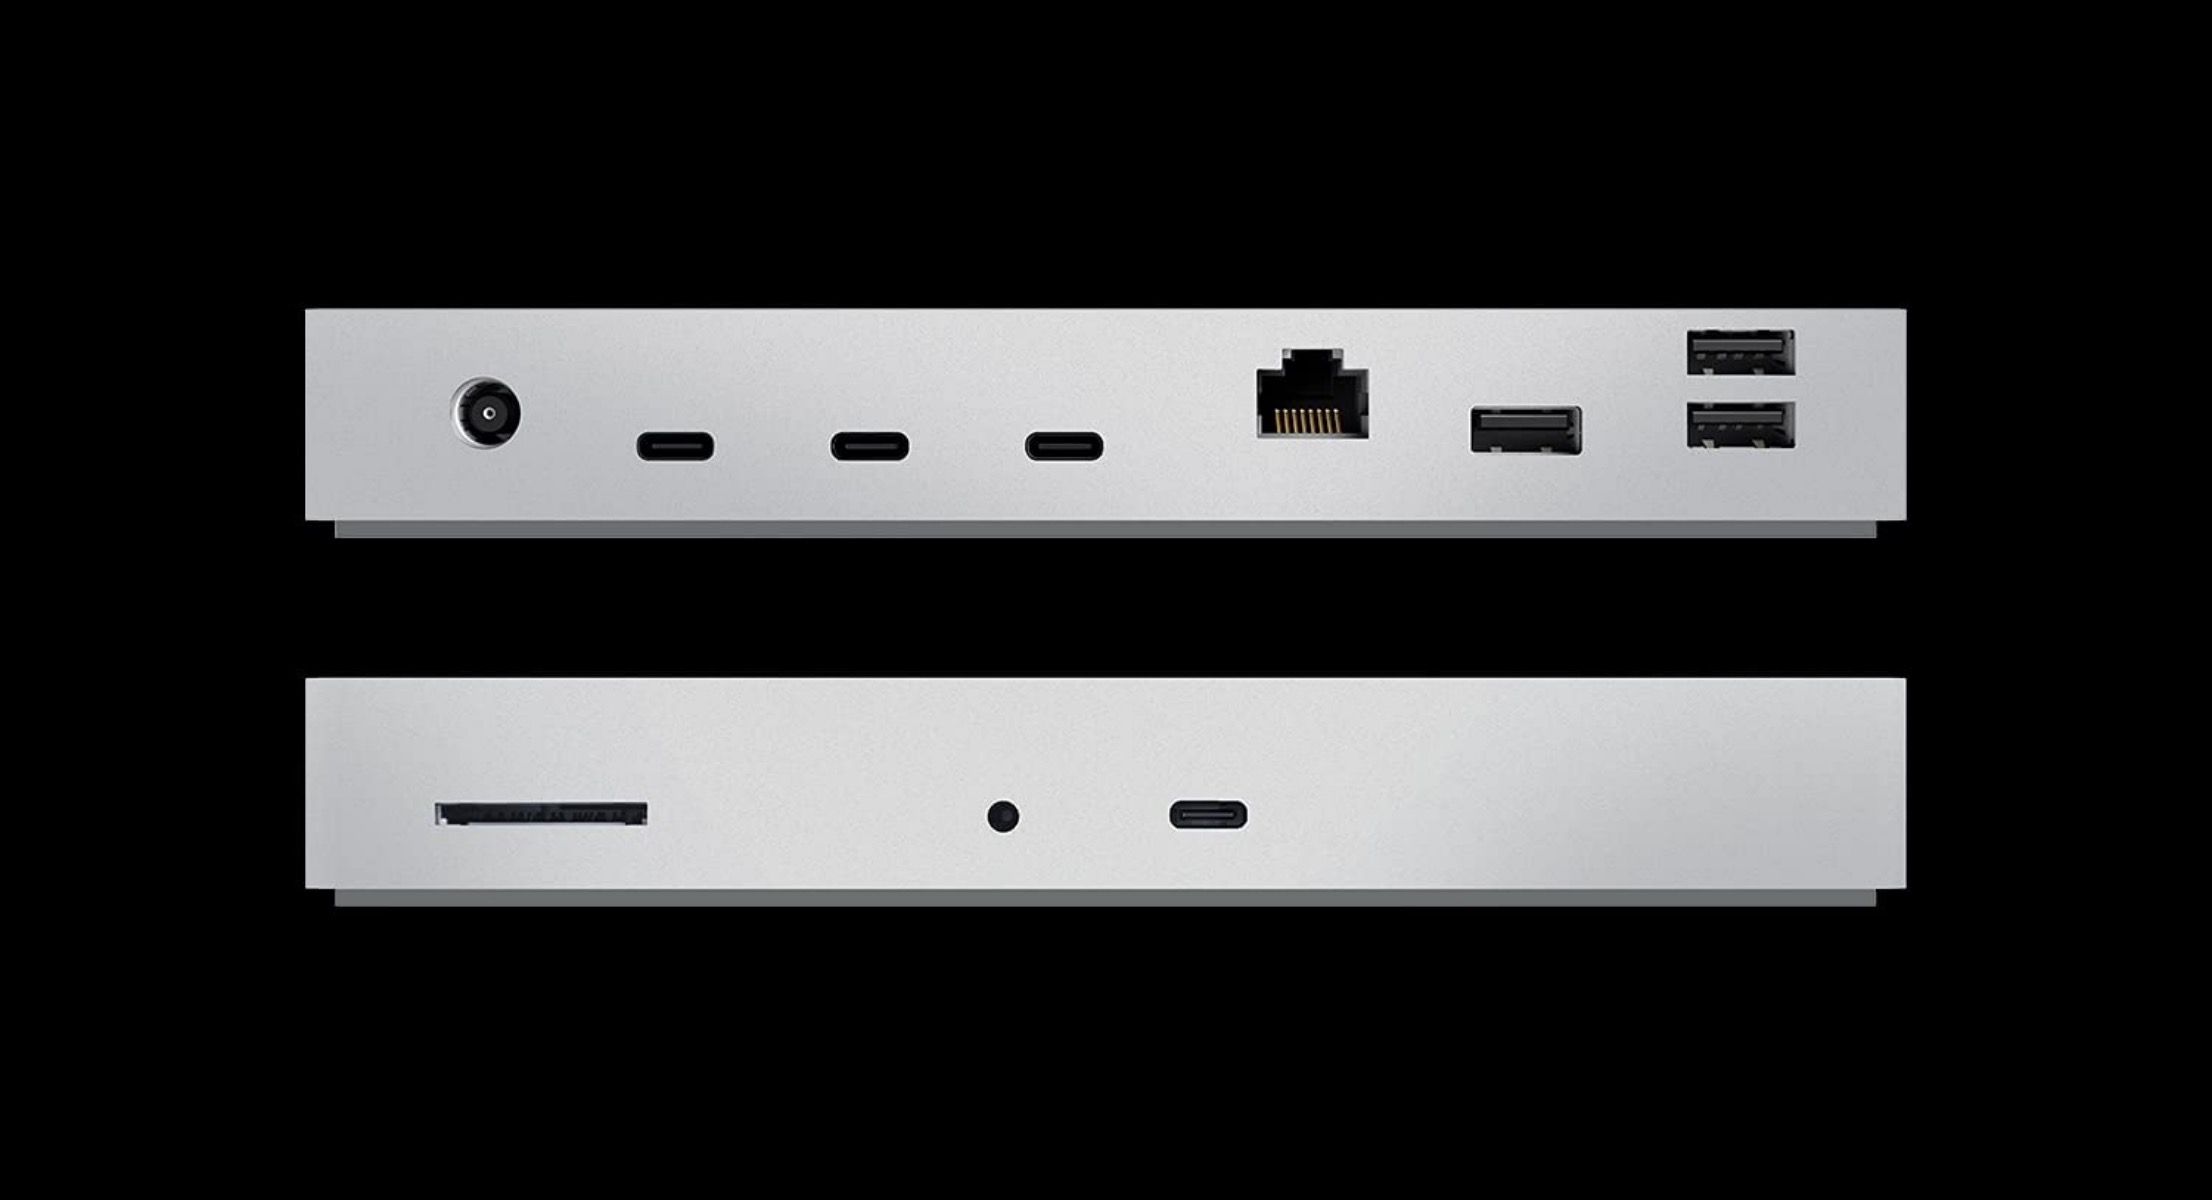 Two silver Razer Thunderbolt 4 Docks showing front and back ports